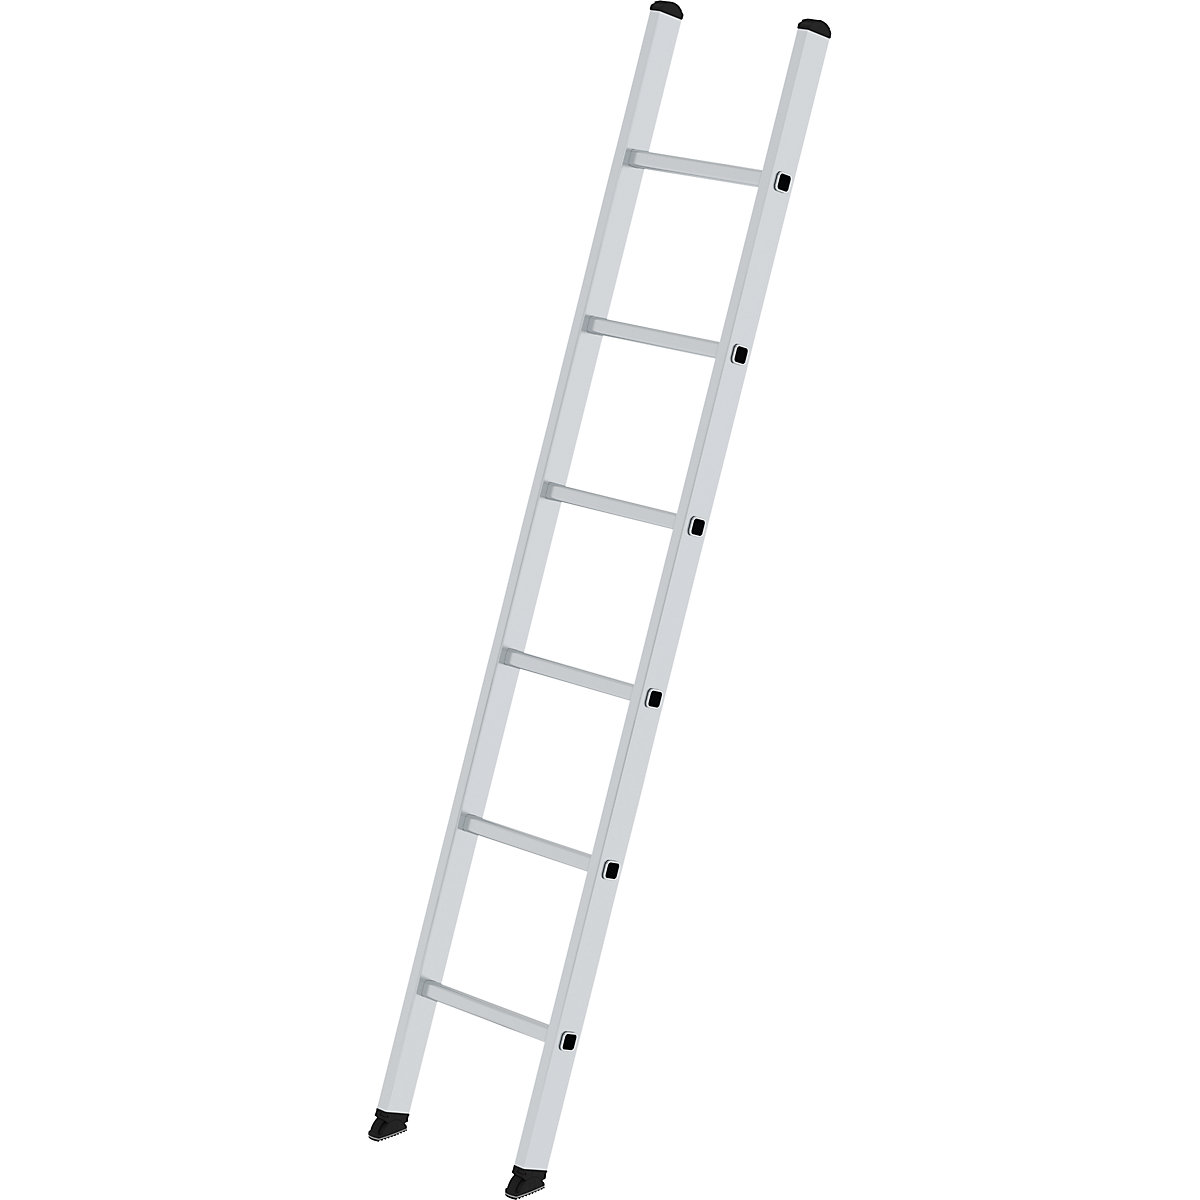 Lean-to rung ladder without beam - MUNK